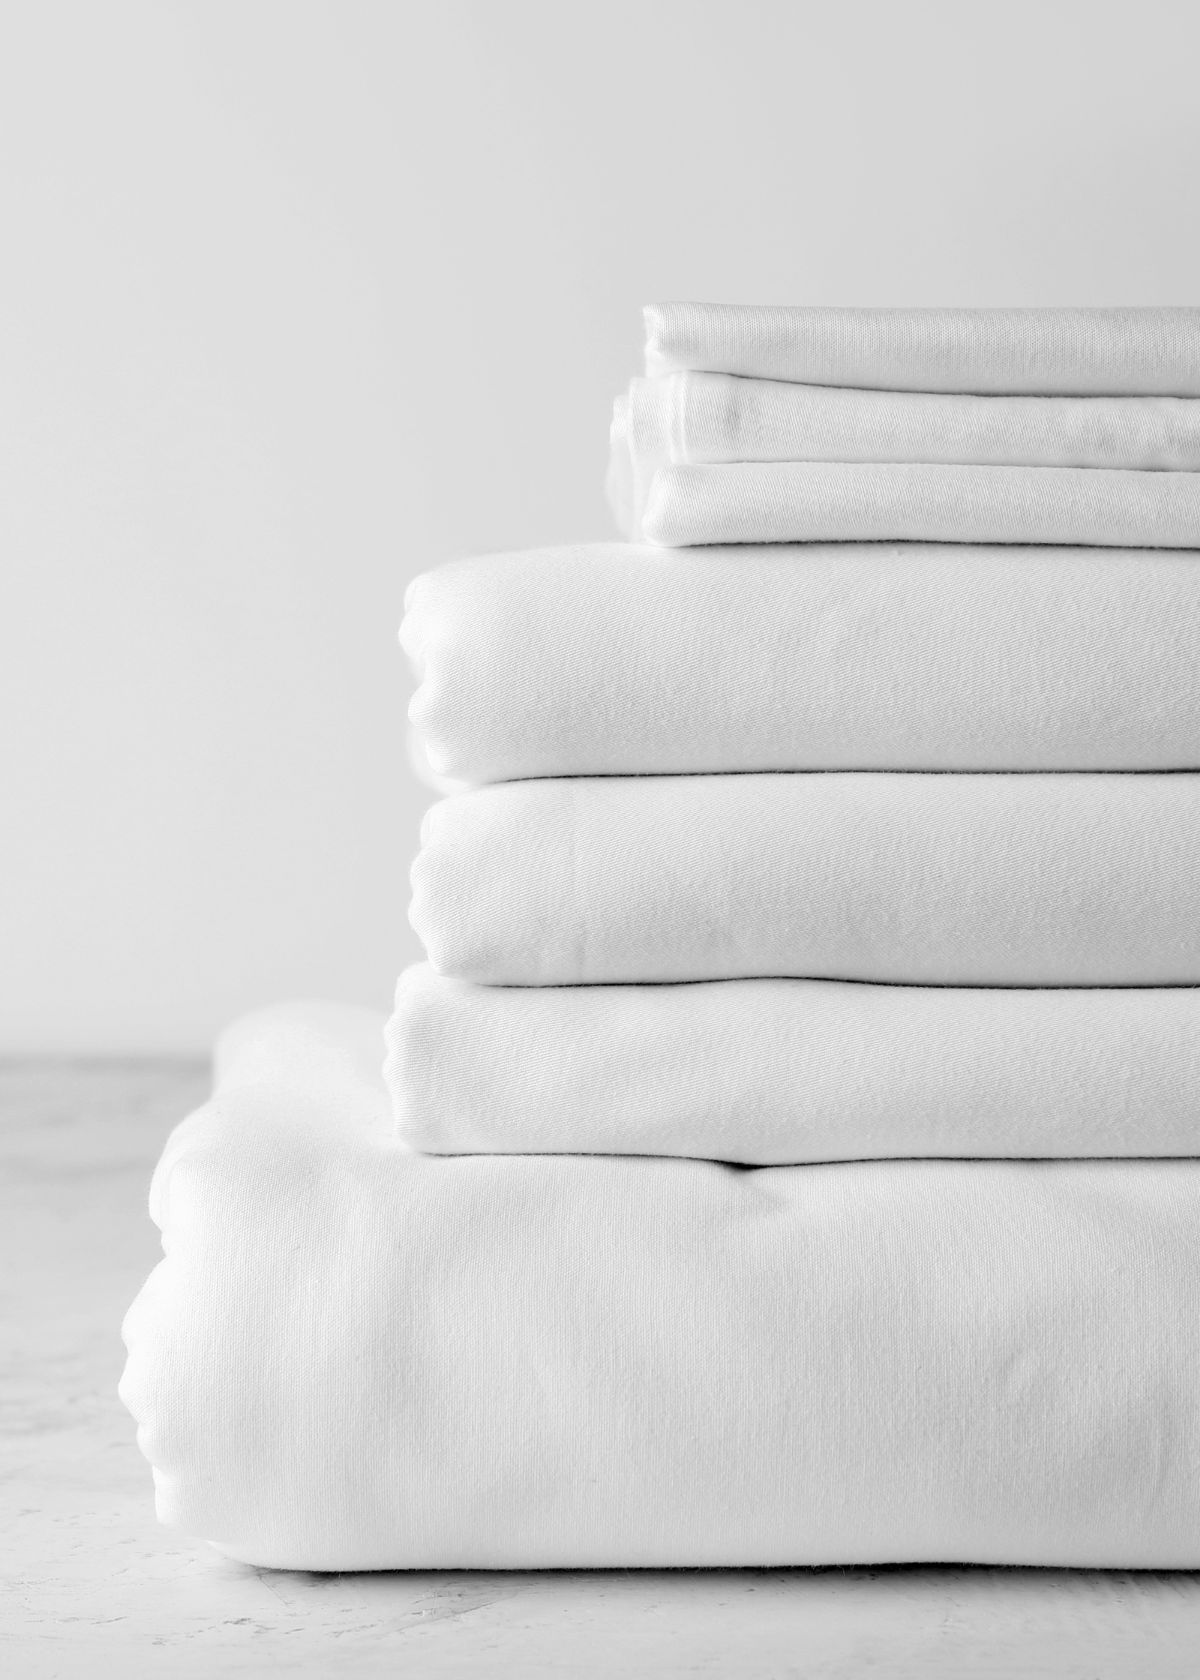 How to Dry Bed Sheets